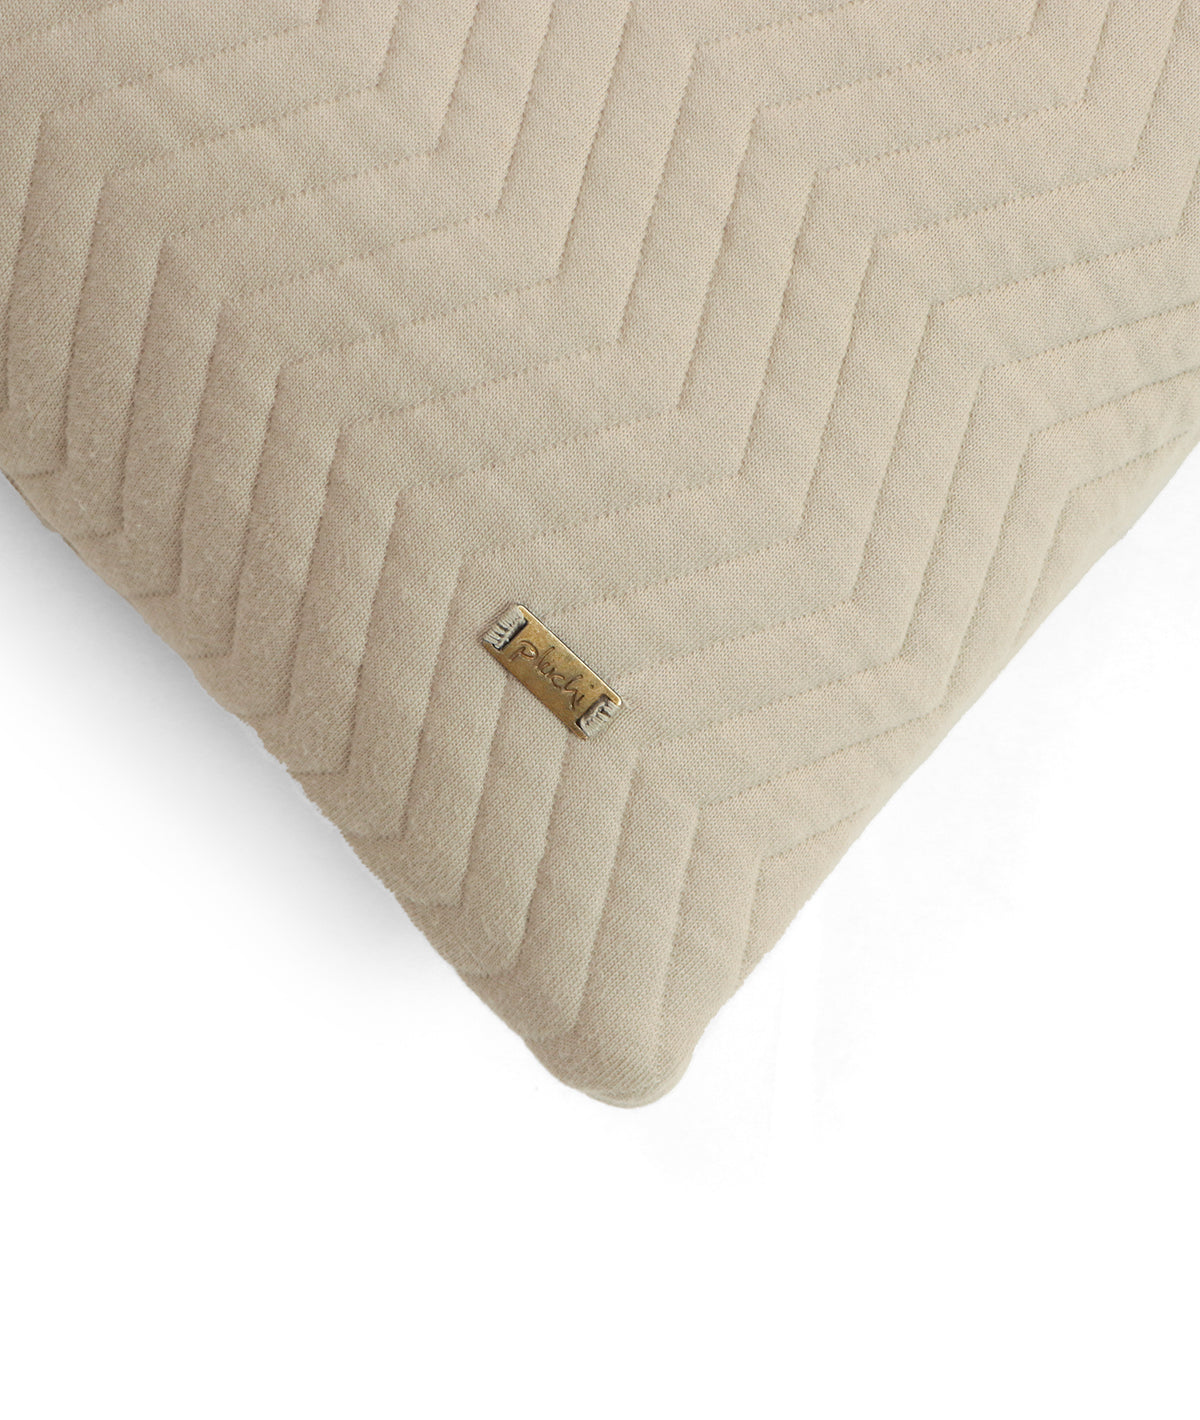 Zig-Zag Pale Whisper & Natural Cotton Knitted Quilted Decorative 18 X 18 Inches Cushion Cover